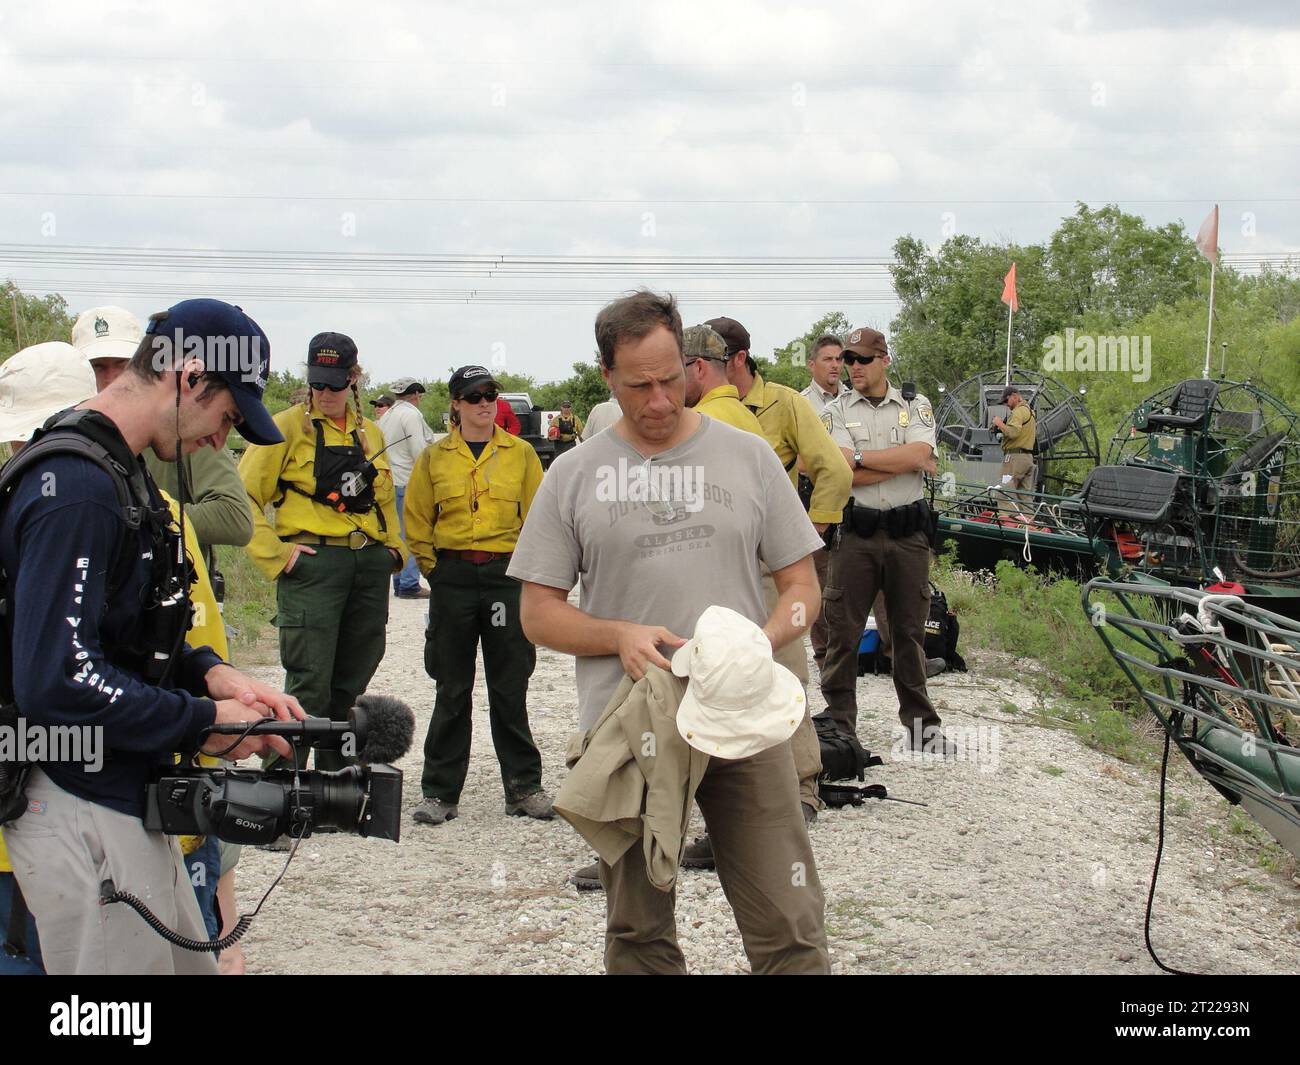 Mike Rowe, the popular host of the Discovery Channel series 'Dirty Jobs with Mike Rowe,' brings his show to the U.S. Fish and Wildlife Service's Arthur R. Marshall Loxahatchee National Wildlife Refuge in April 2010. Between segments, Mike returned to a g. Subjects: Connecting people with nature; Work of the Service. Location: Florida. Fish and Wildlife Service Site: ARTHUR R. MARSHALL LOXAHATCHEE NATIONAL WILDLIFE REFUGE. Stock Photo